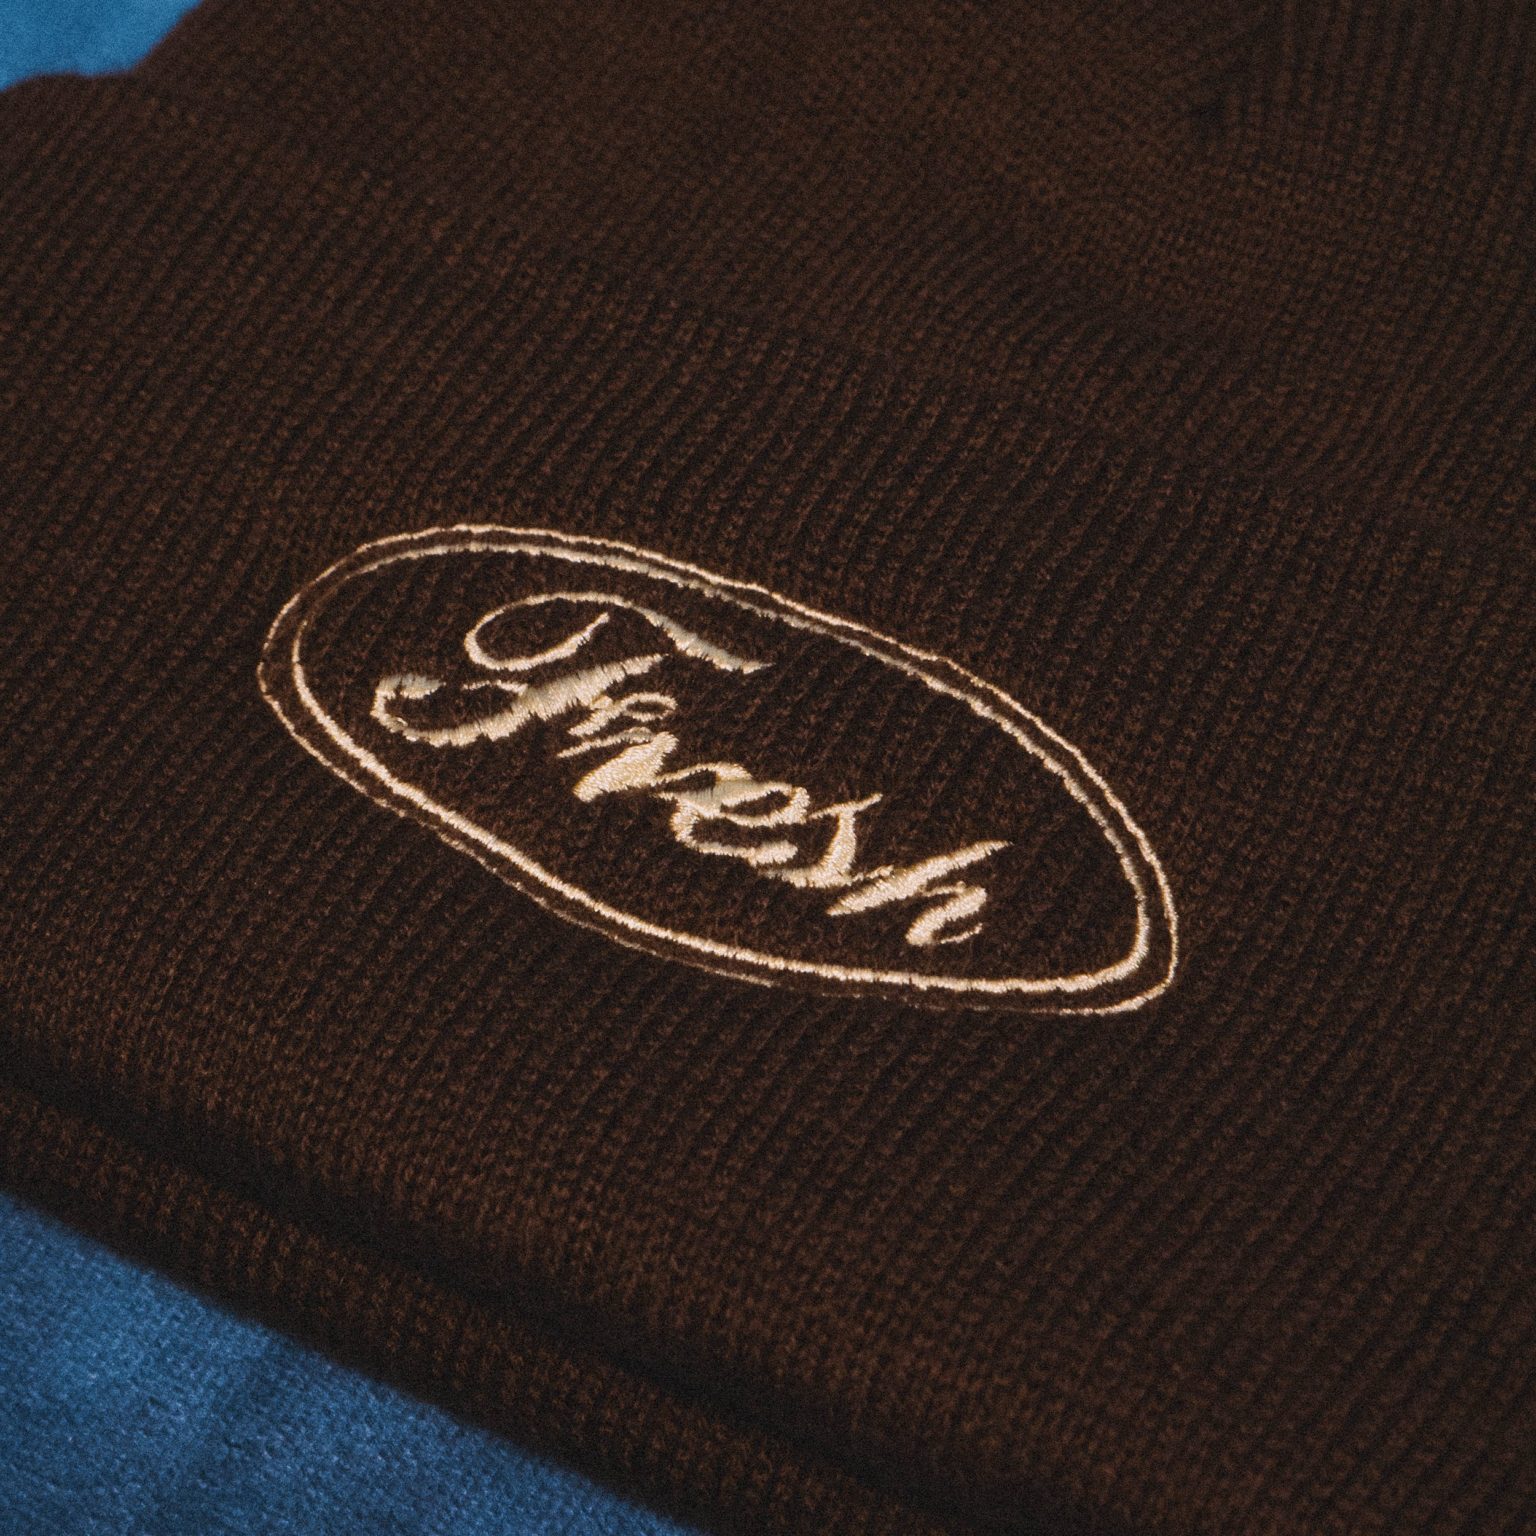 Fresh Motors – Brown Embroidered Beanie